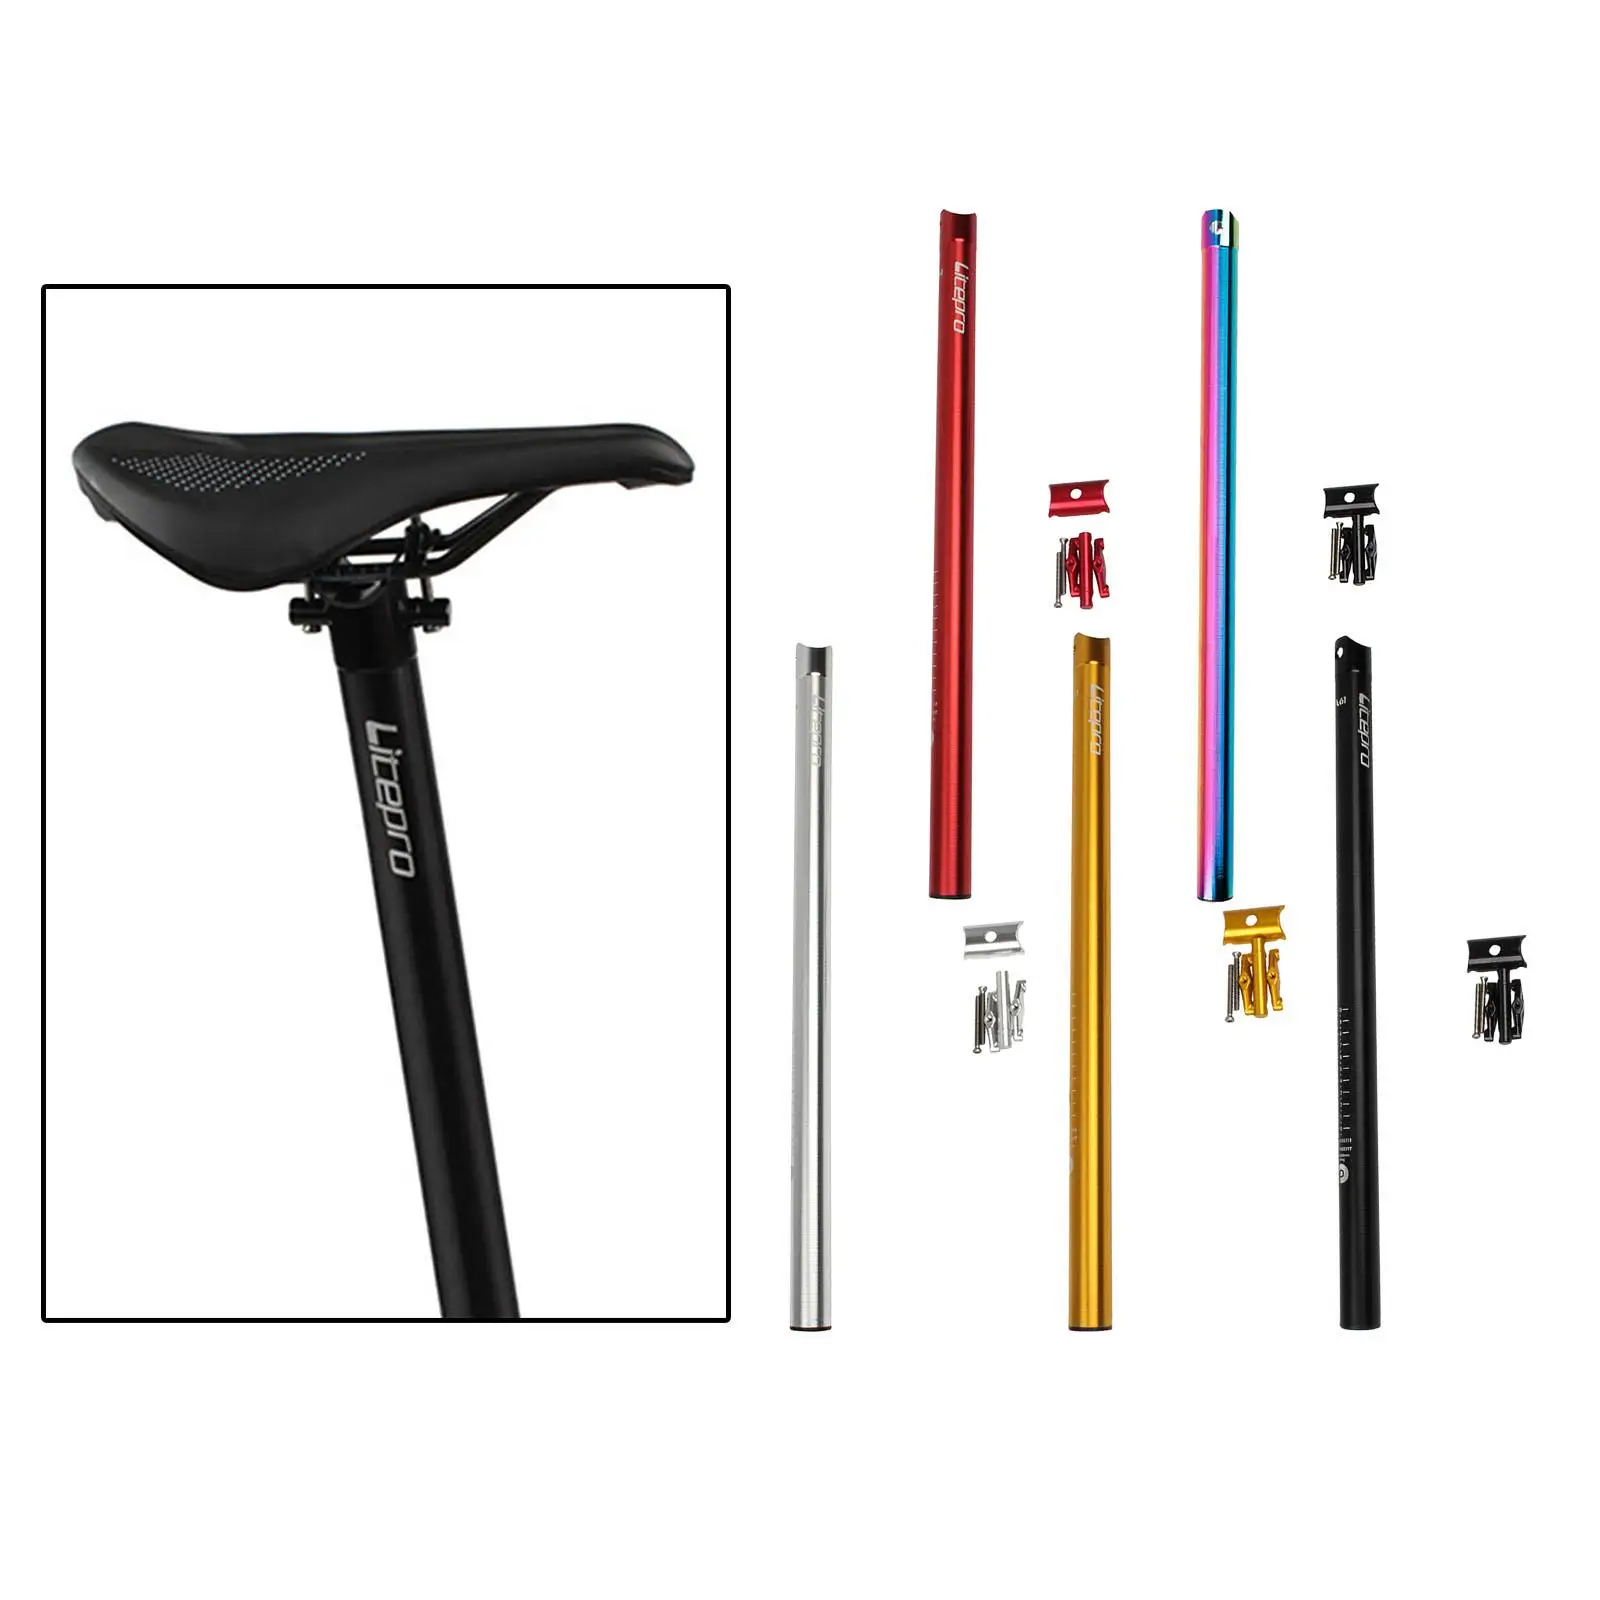 Folding Bike Seatpost Seat Rod Aluminum Alloy 31.8 Seat Post Seat Tube Seatpipe Replacement for